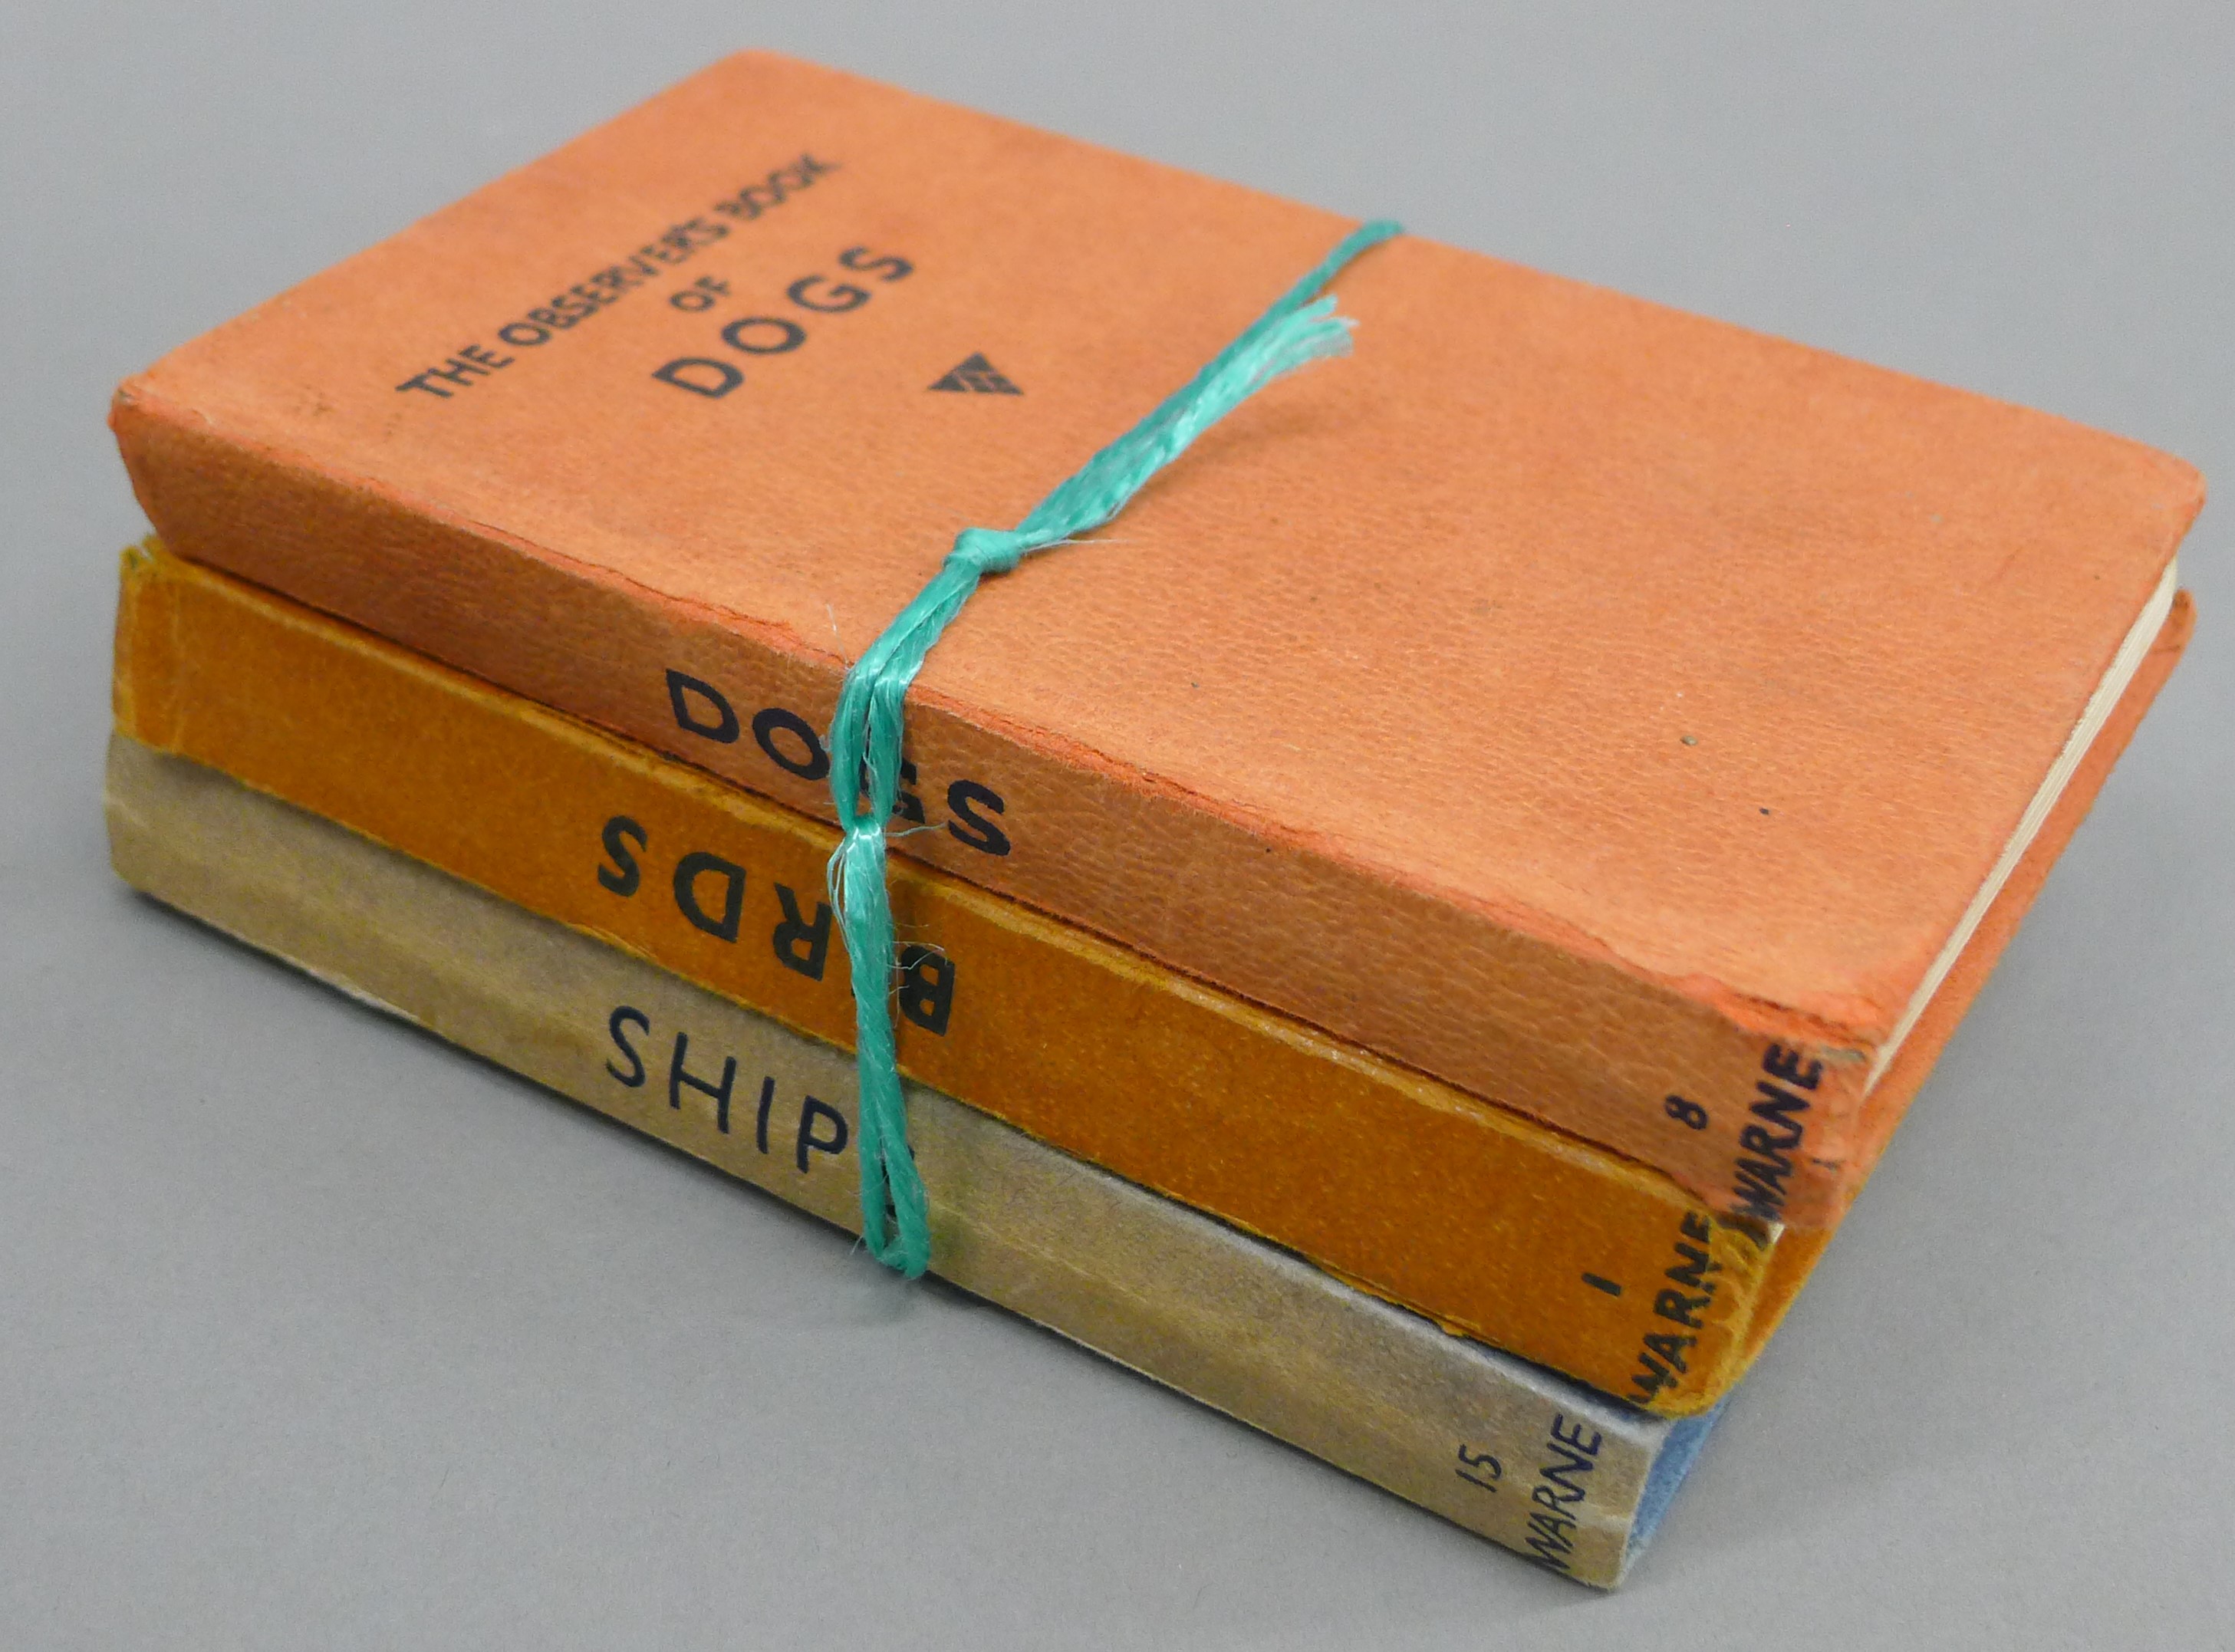 Three Observer books - Dogs, Birds and Ships, one first edition.